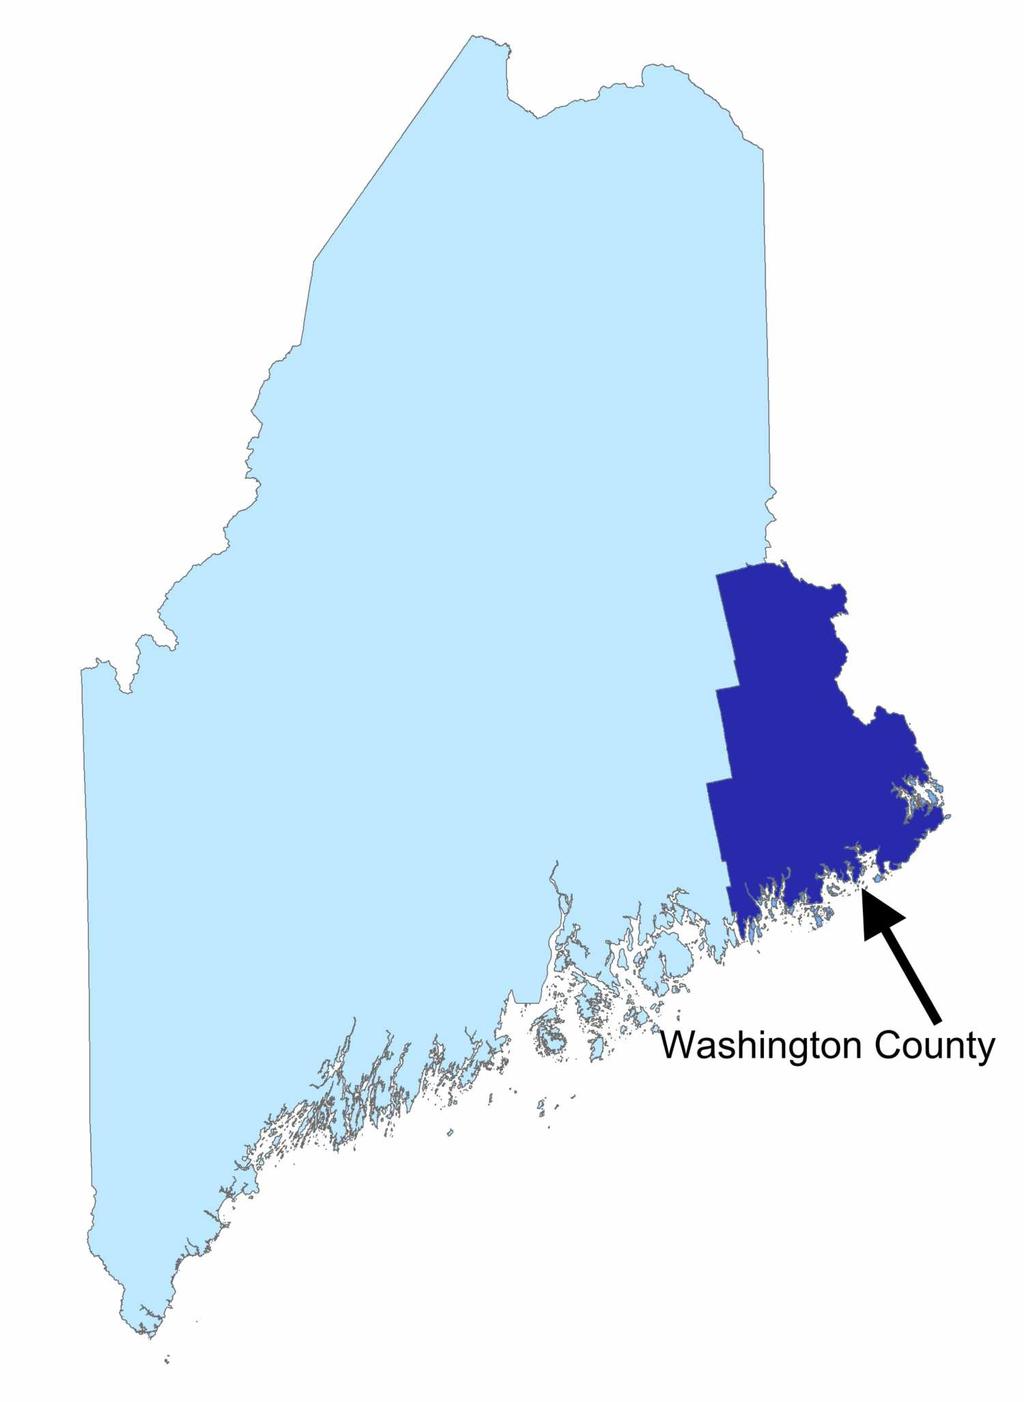 Figure 1. Location of Washington County in the State of Maine.